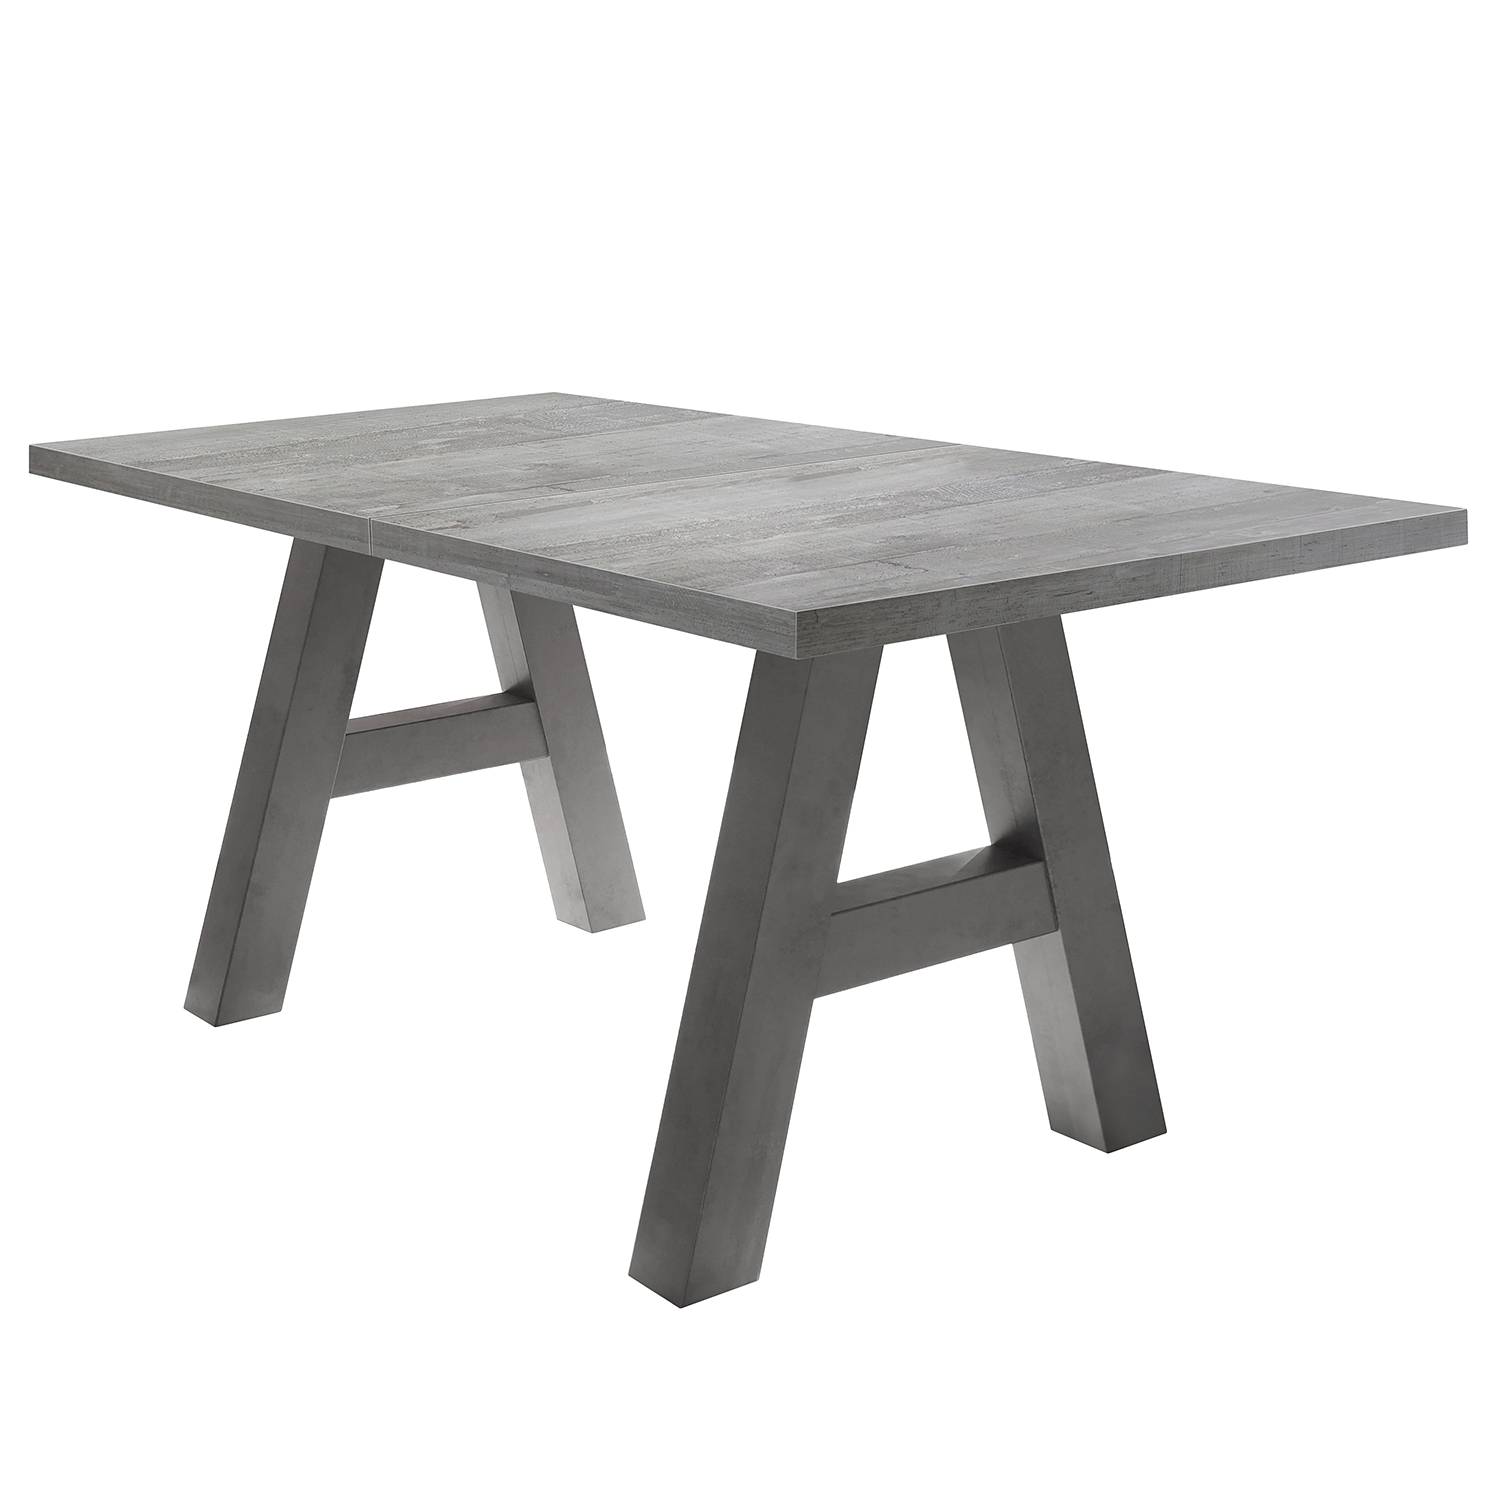 Image of Table extensible Leeton l 000000001000121540